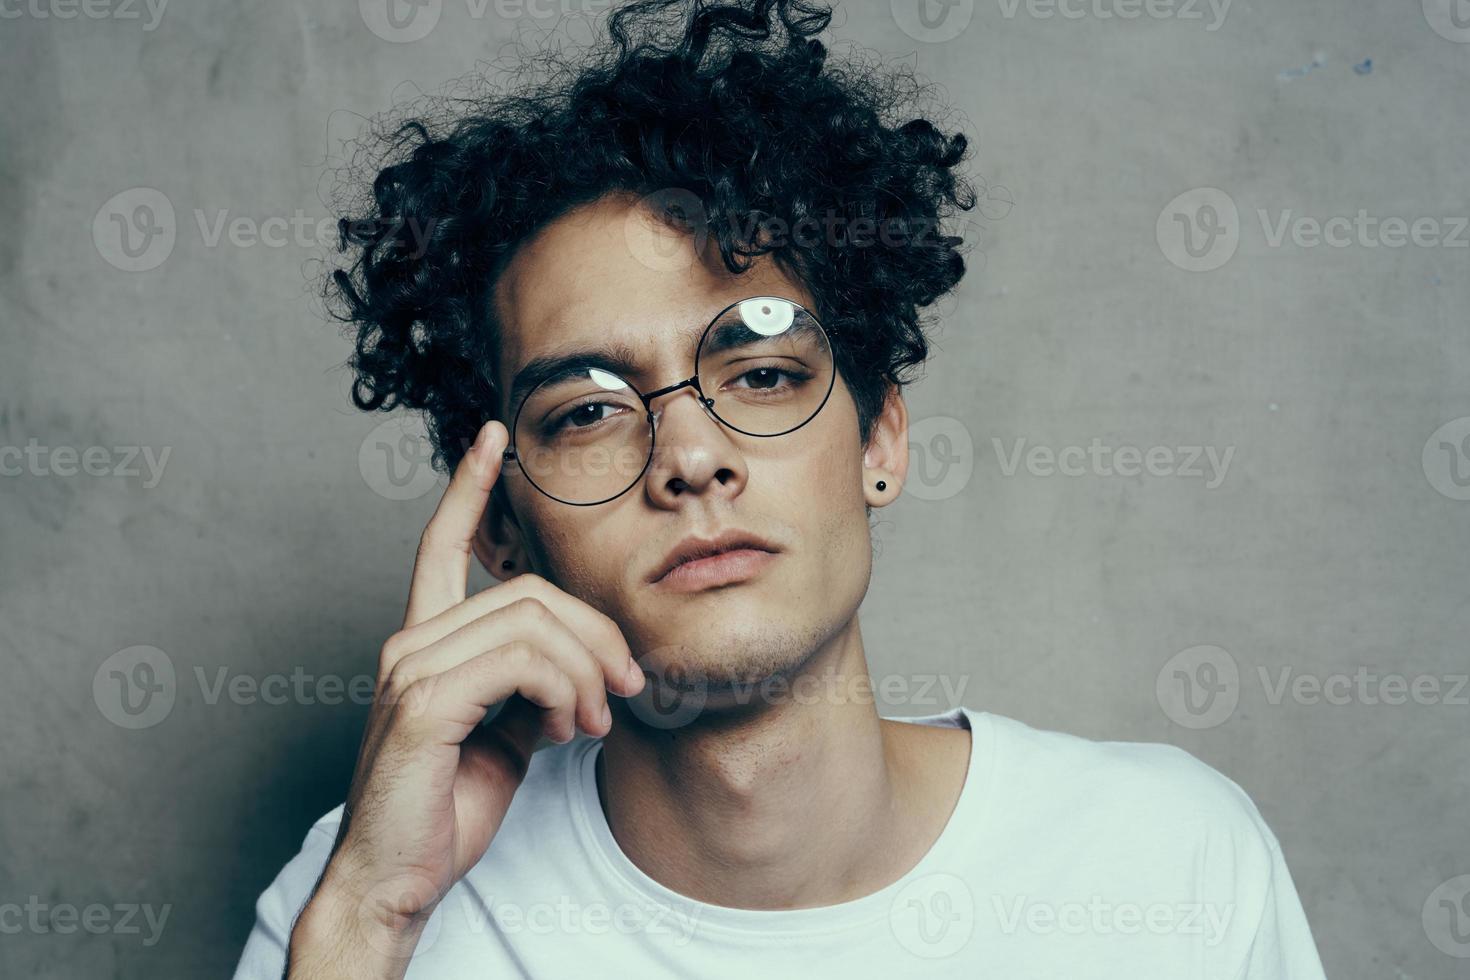 guy with curly hair emotions glasses fashion studio close-up photo